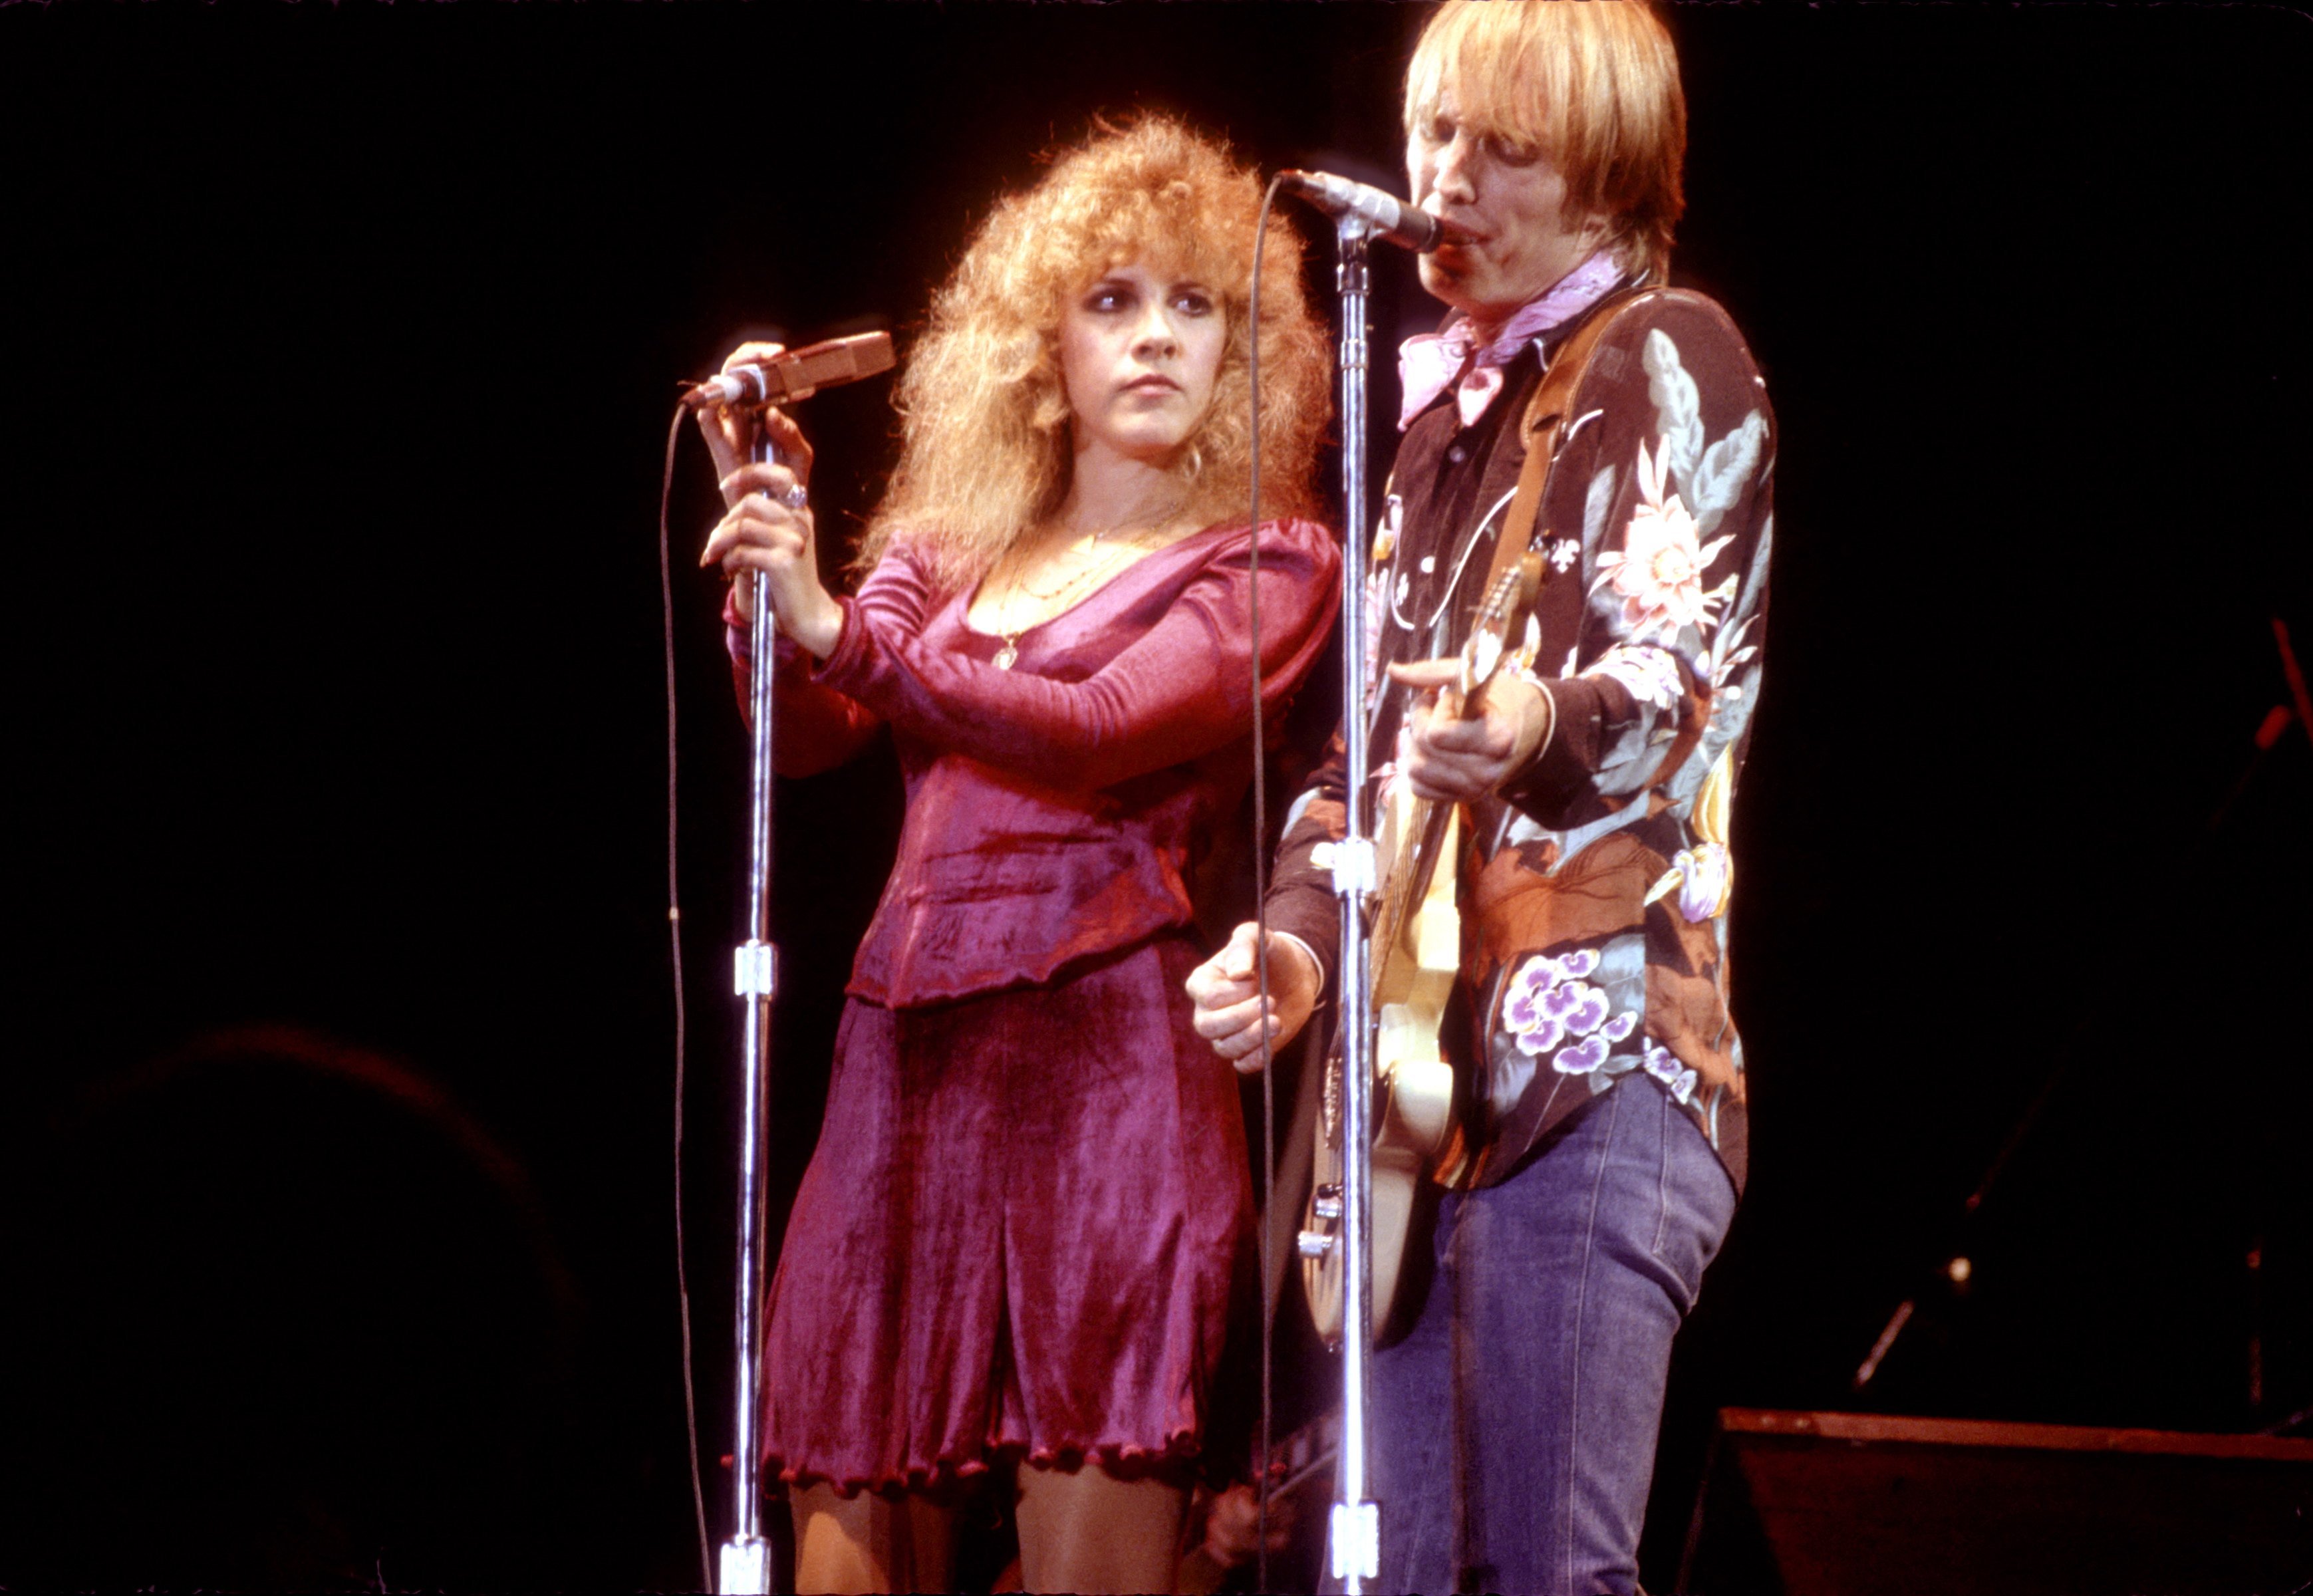 The Song Tom Petty Gave to Stevie Nicks out of 'Terrible Guilt'